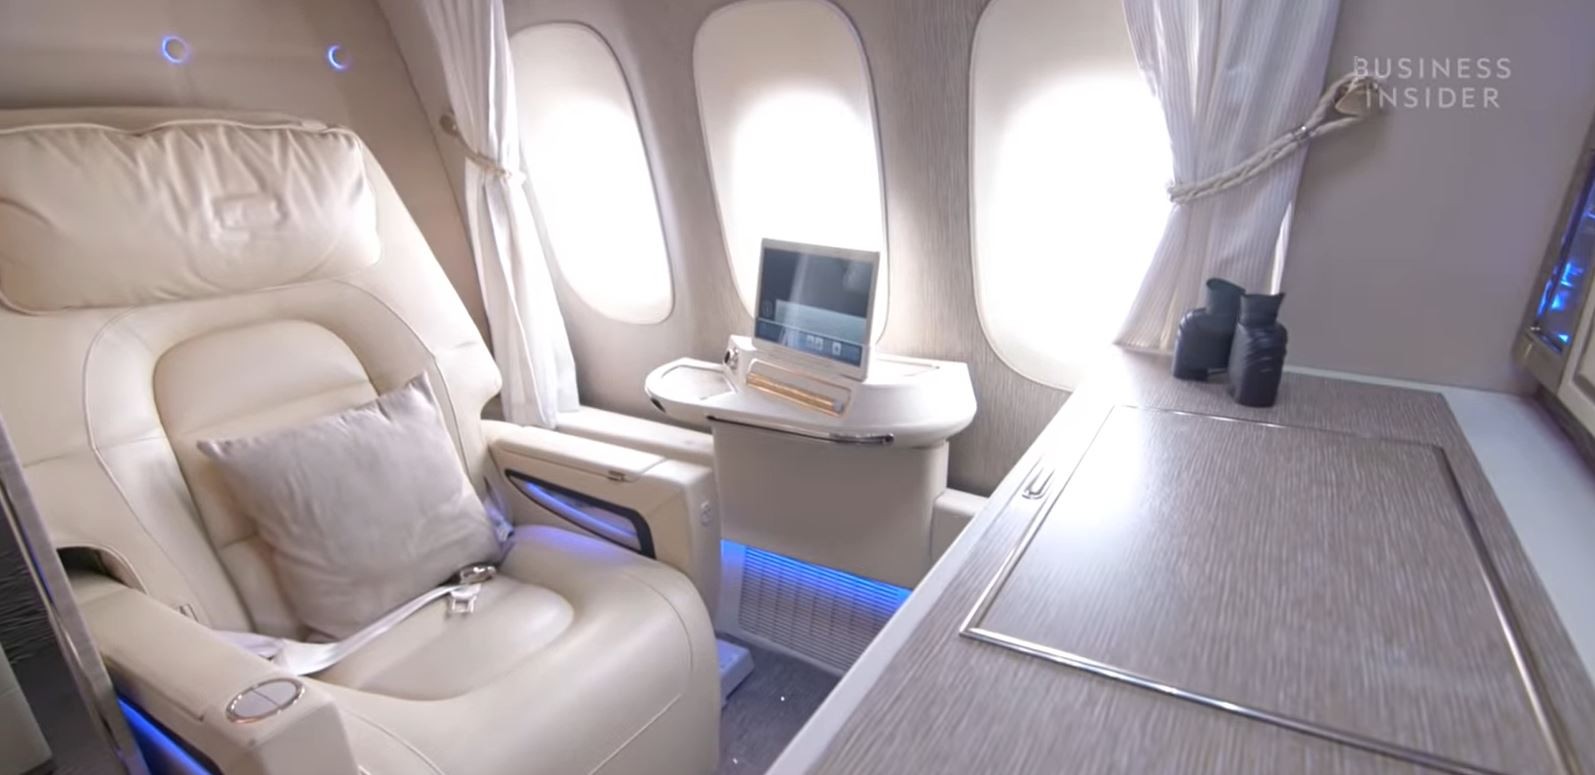 The Emirates’ first-class cabin has a magazine rack, a selection of drinks and snacks, and a 32-inch television. Guests are provided with Bowers & Wilkins E1 headphones. Photo: Business Insider